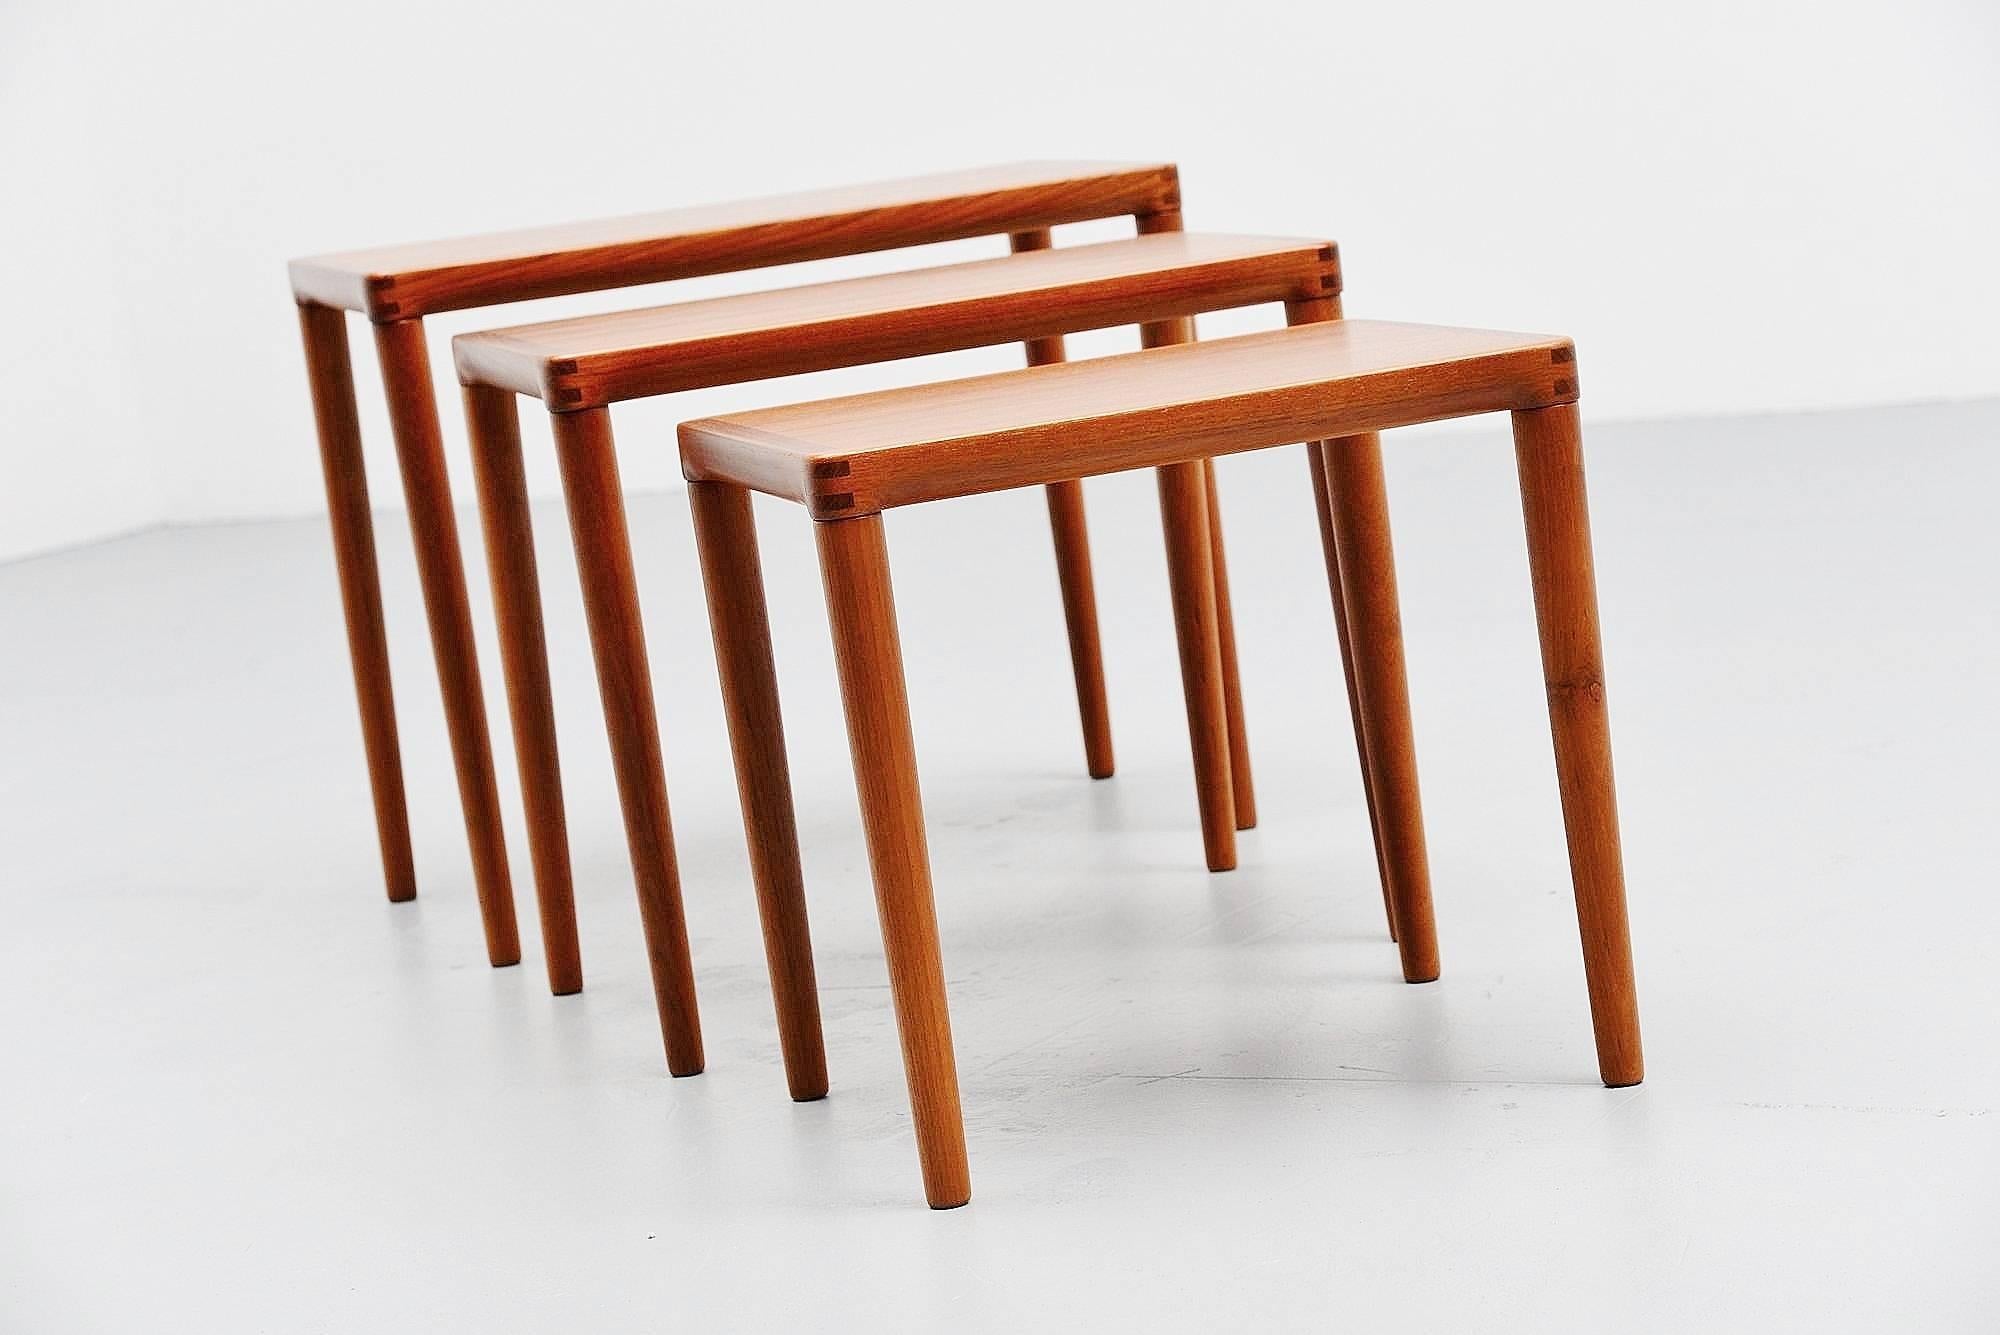 Very nice nesting table set made and designed by Bramin, Denmark, 1965. The tables are made of solid teakwood and have very nice dovetail connections on the corners which are used in several furniture made by Bramin. The tables look great and are